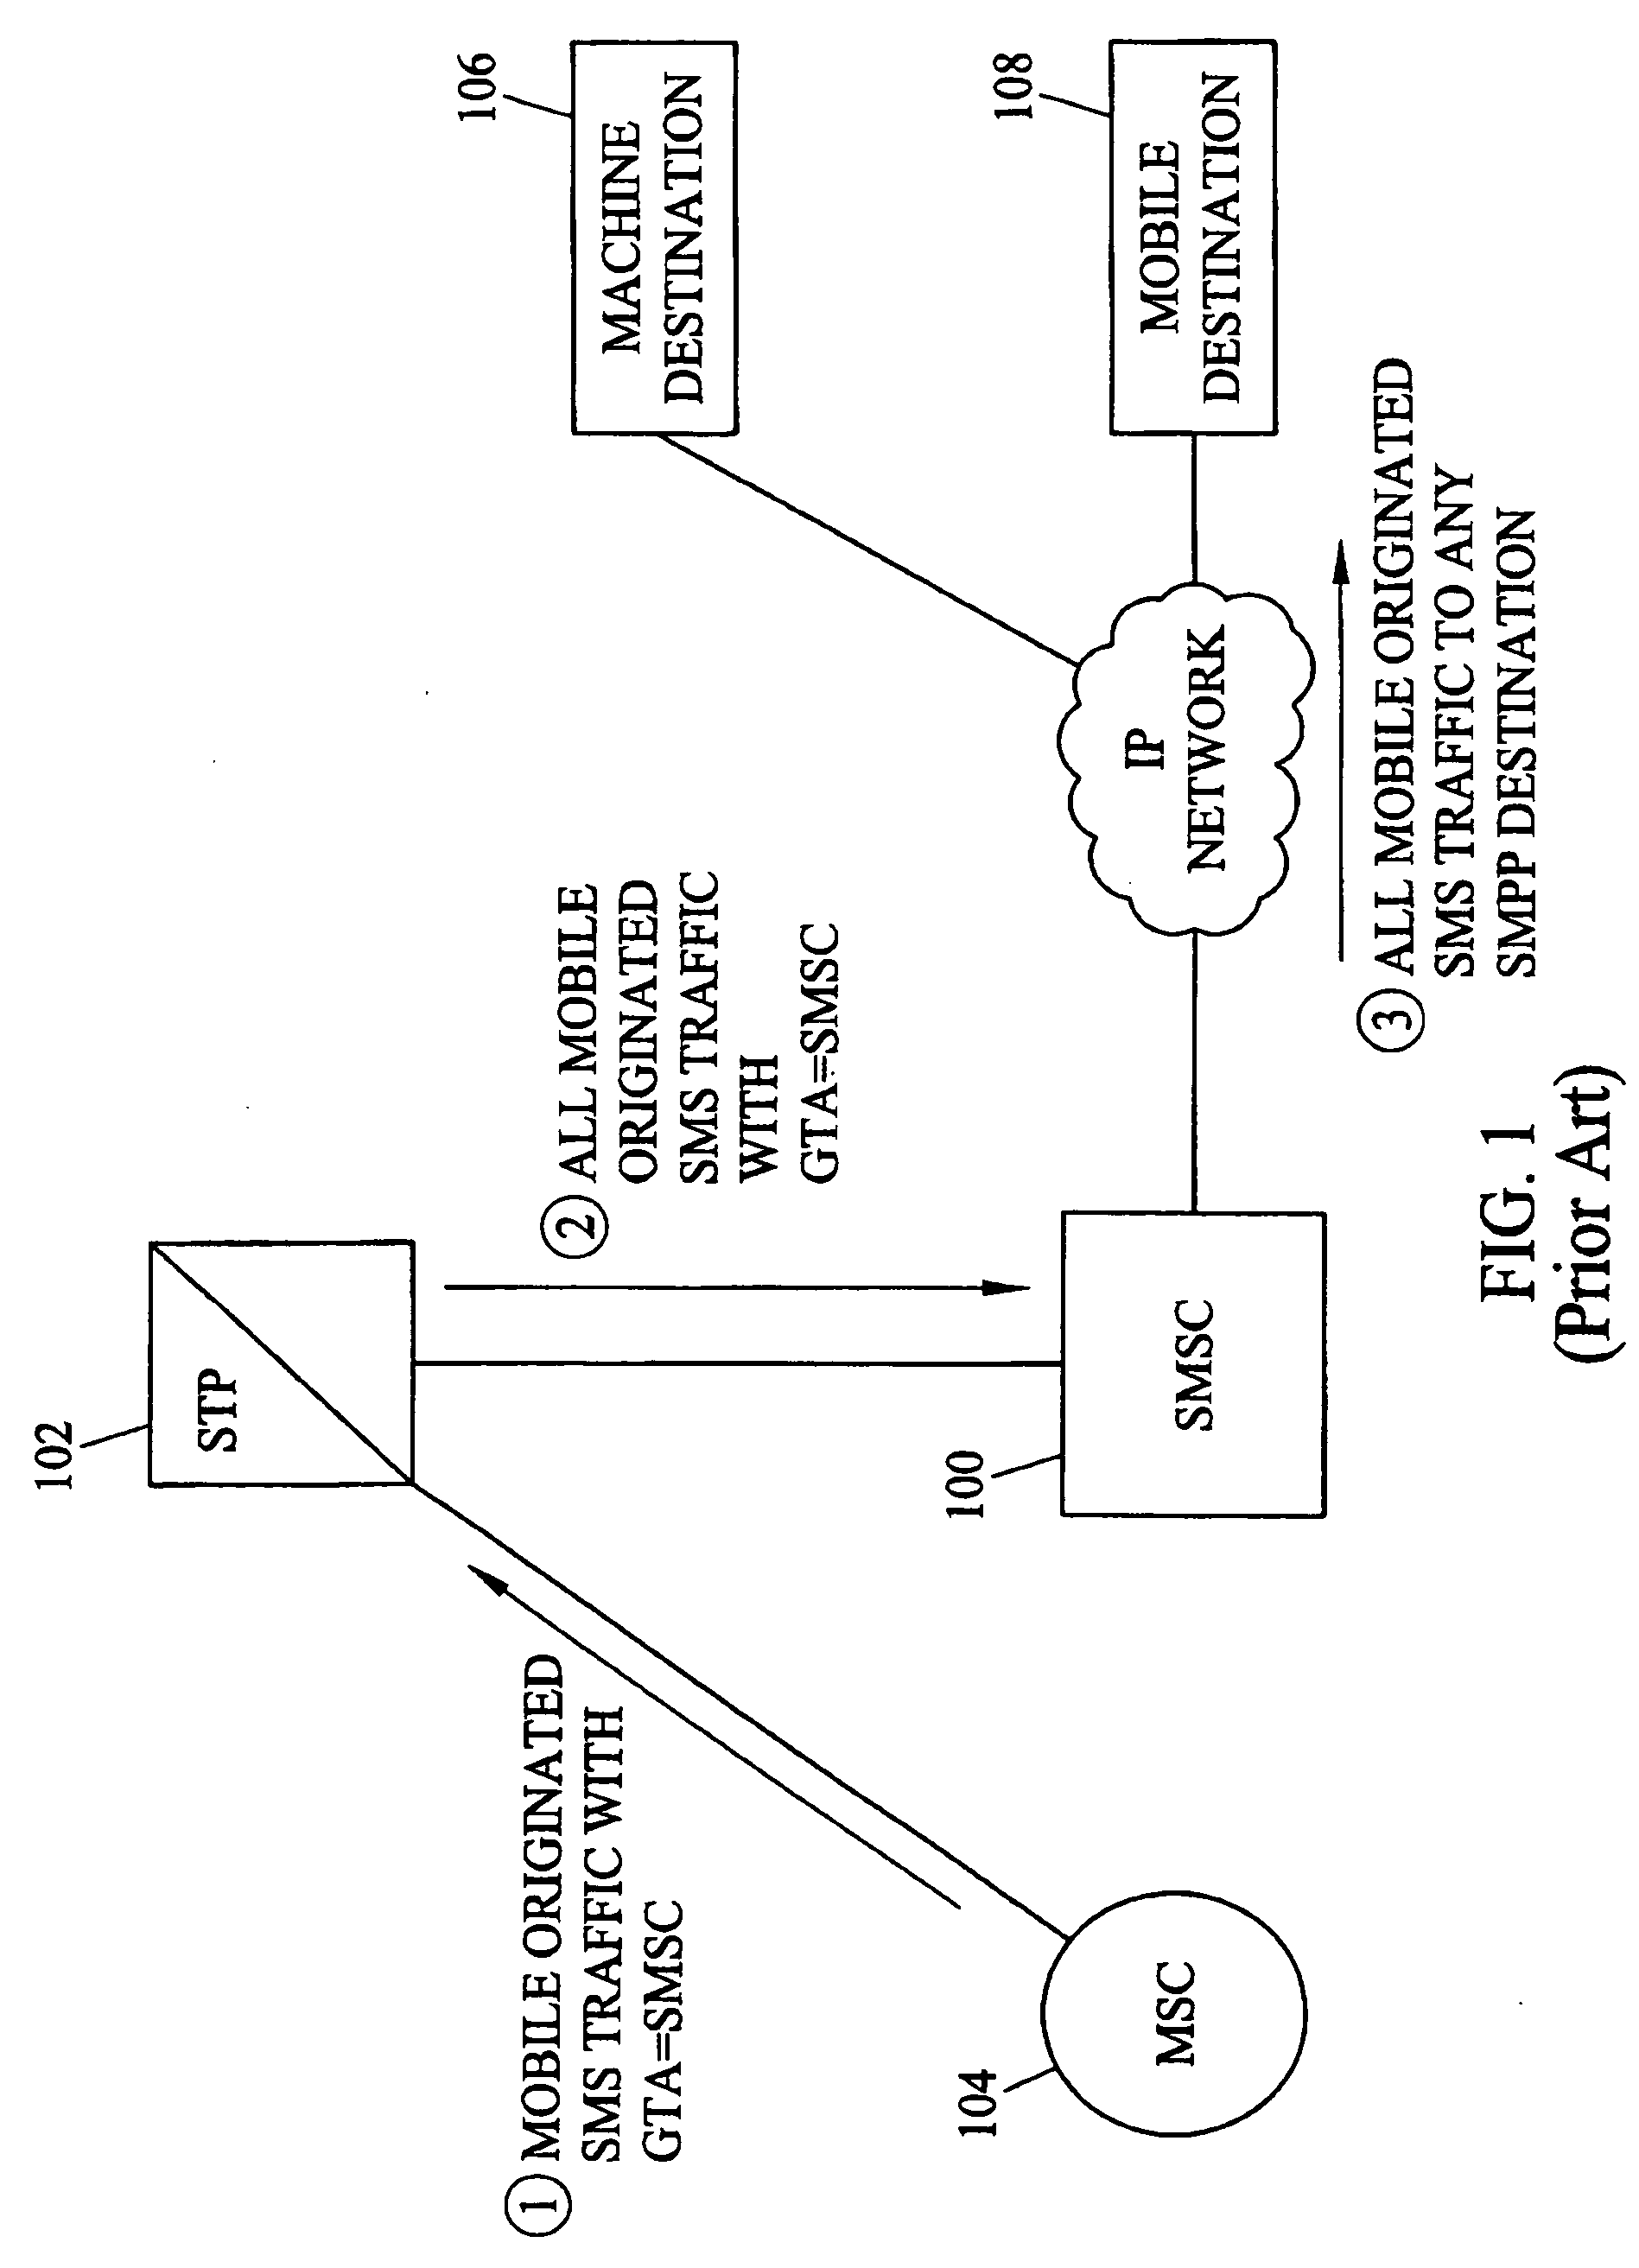 Methods and systems for automatically bypassing short message service center for short message service (SMS) messages destined for predetermined short message peer-to-peer (SMPP) destinations